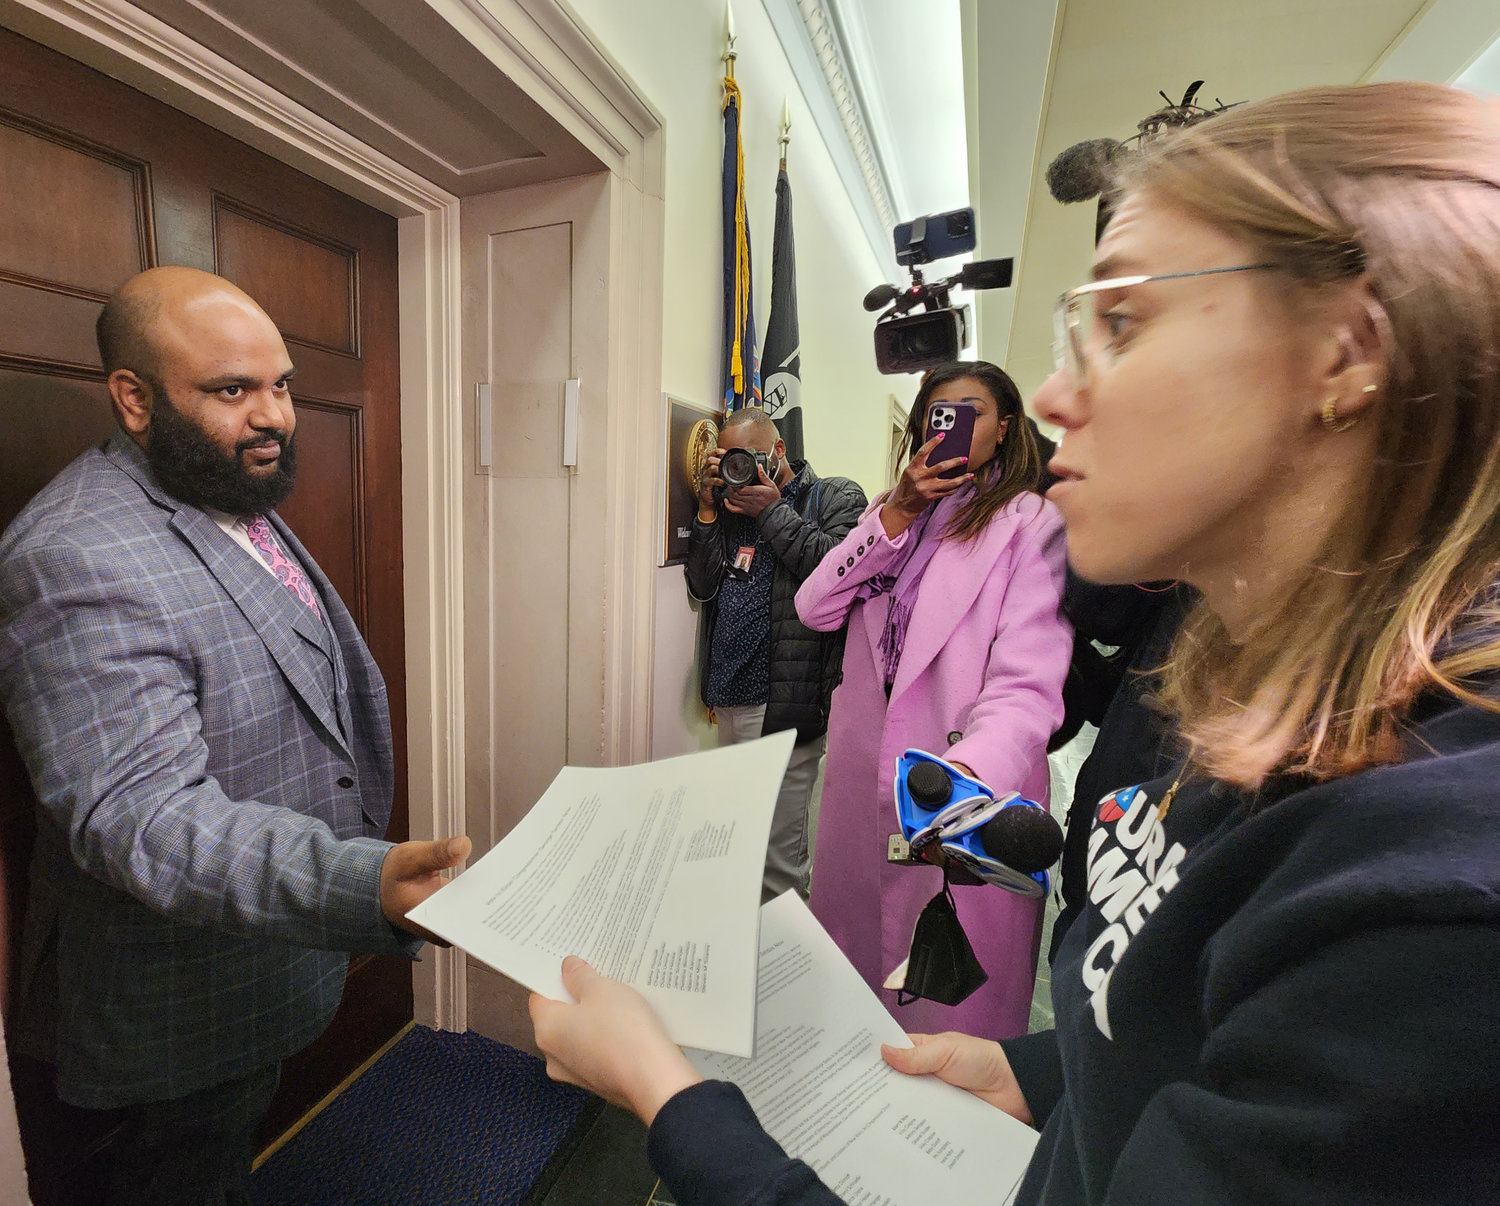 Casey Sabella, far right, an organizer with the group Courage for America, delivers petitions from constituents of the 3rd Congressional District to a staffer outside the Washington office of U.S. Rep. George Santos on Tuesday. Sabella and others called on Santos to resign during a trip to Capitol Hill ahead of President Biden’s State of the Union address.